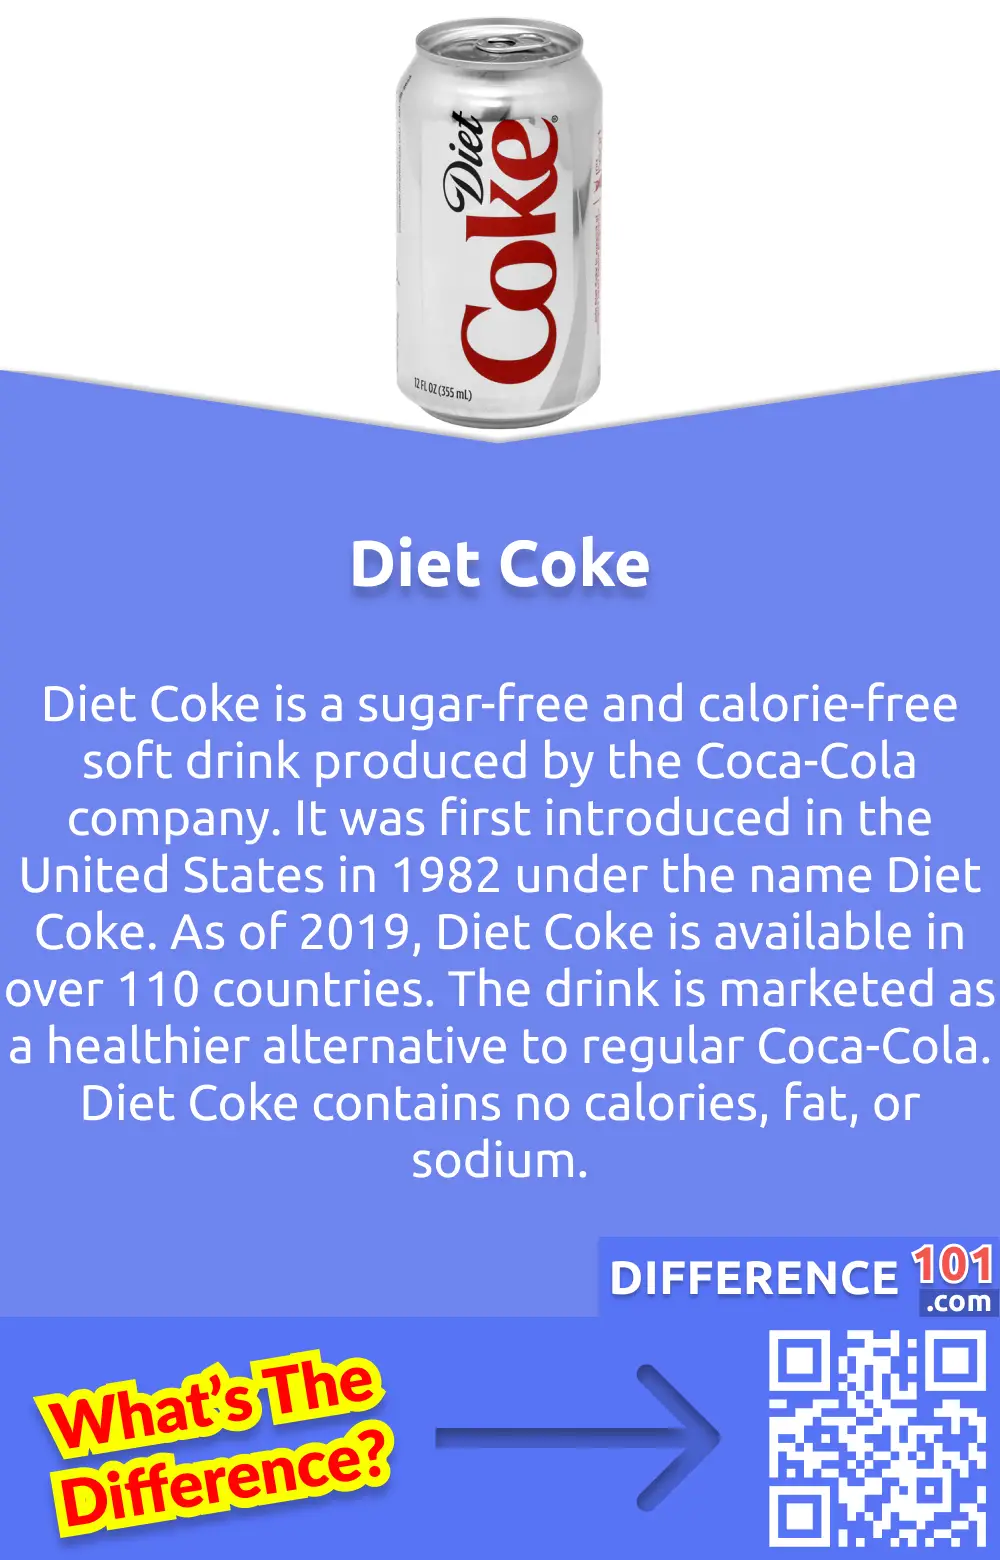 What Is Diet Coke? Diet Coke is a sugar-free and calorie-free soft drink produced by the Coca-Cola company. It was first introduced in the United States in 1982 under the name Diet Coke. As of 2019, Diet Coke is available in over 110 countries. The drink is marketed as a healthier alternative to regular Coca-Cola. Diet Coke contains no calories, fat, or sodium.